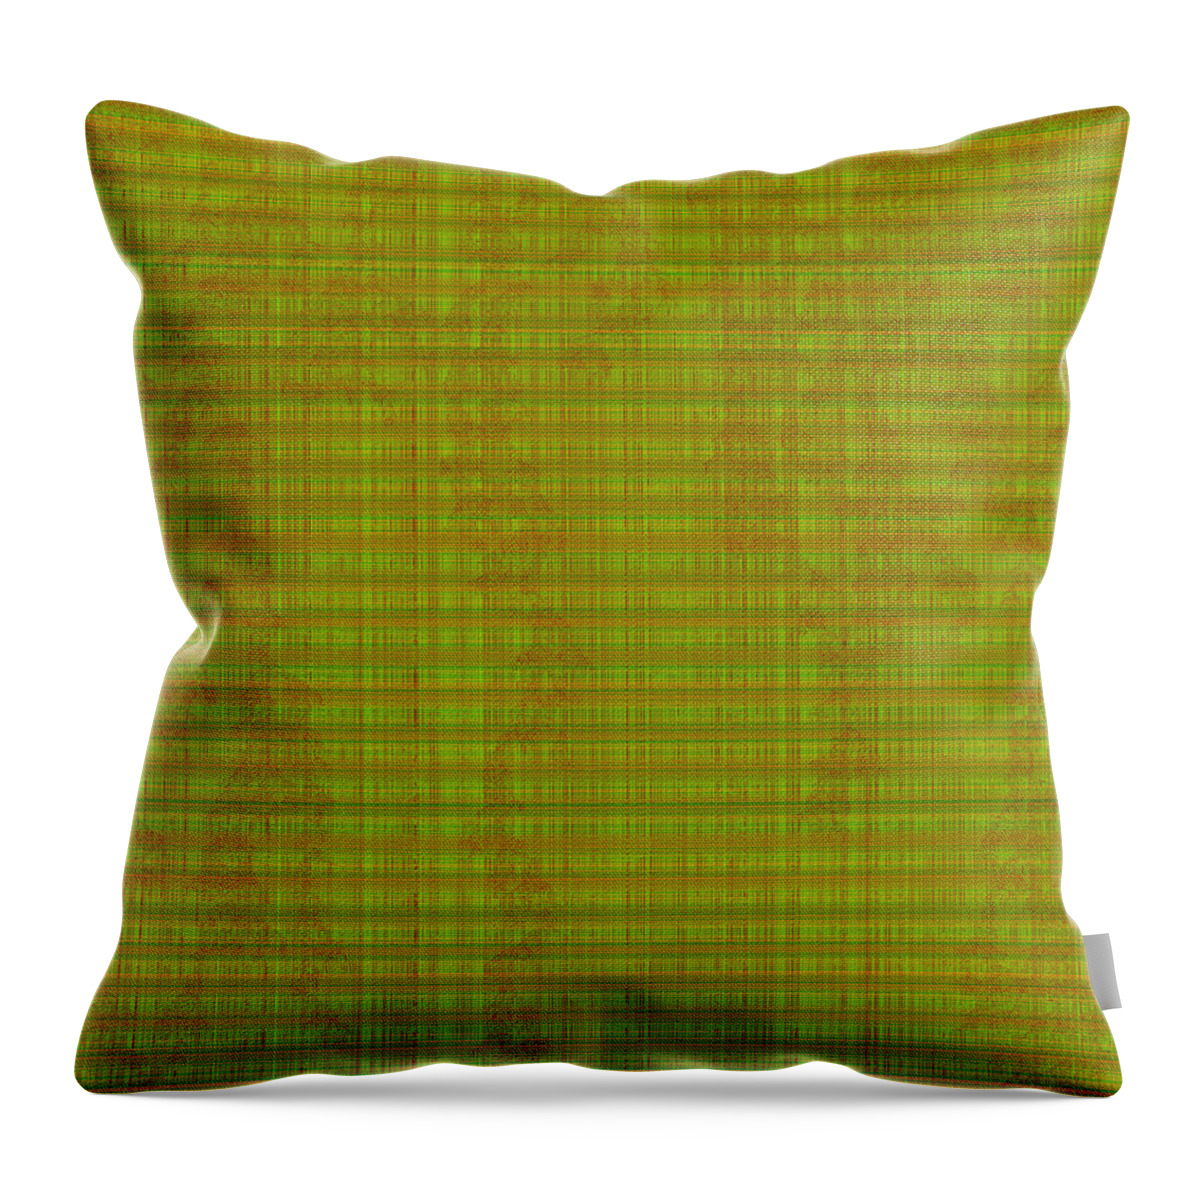 Patterns Throw Pillow featuring the digital art Pattern 11 - Sequencer by Richard Ortolano